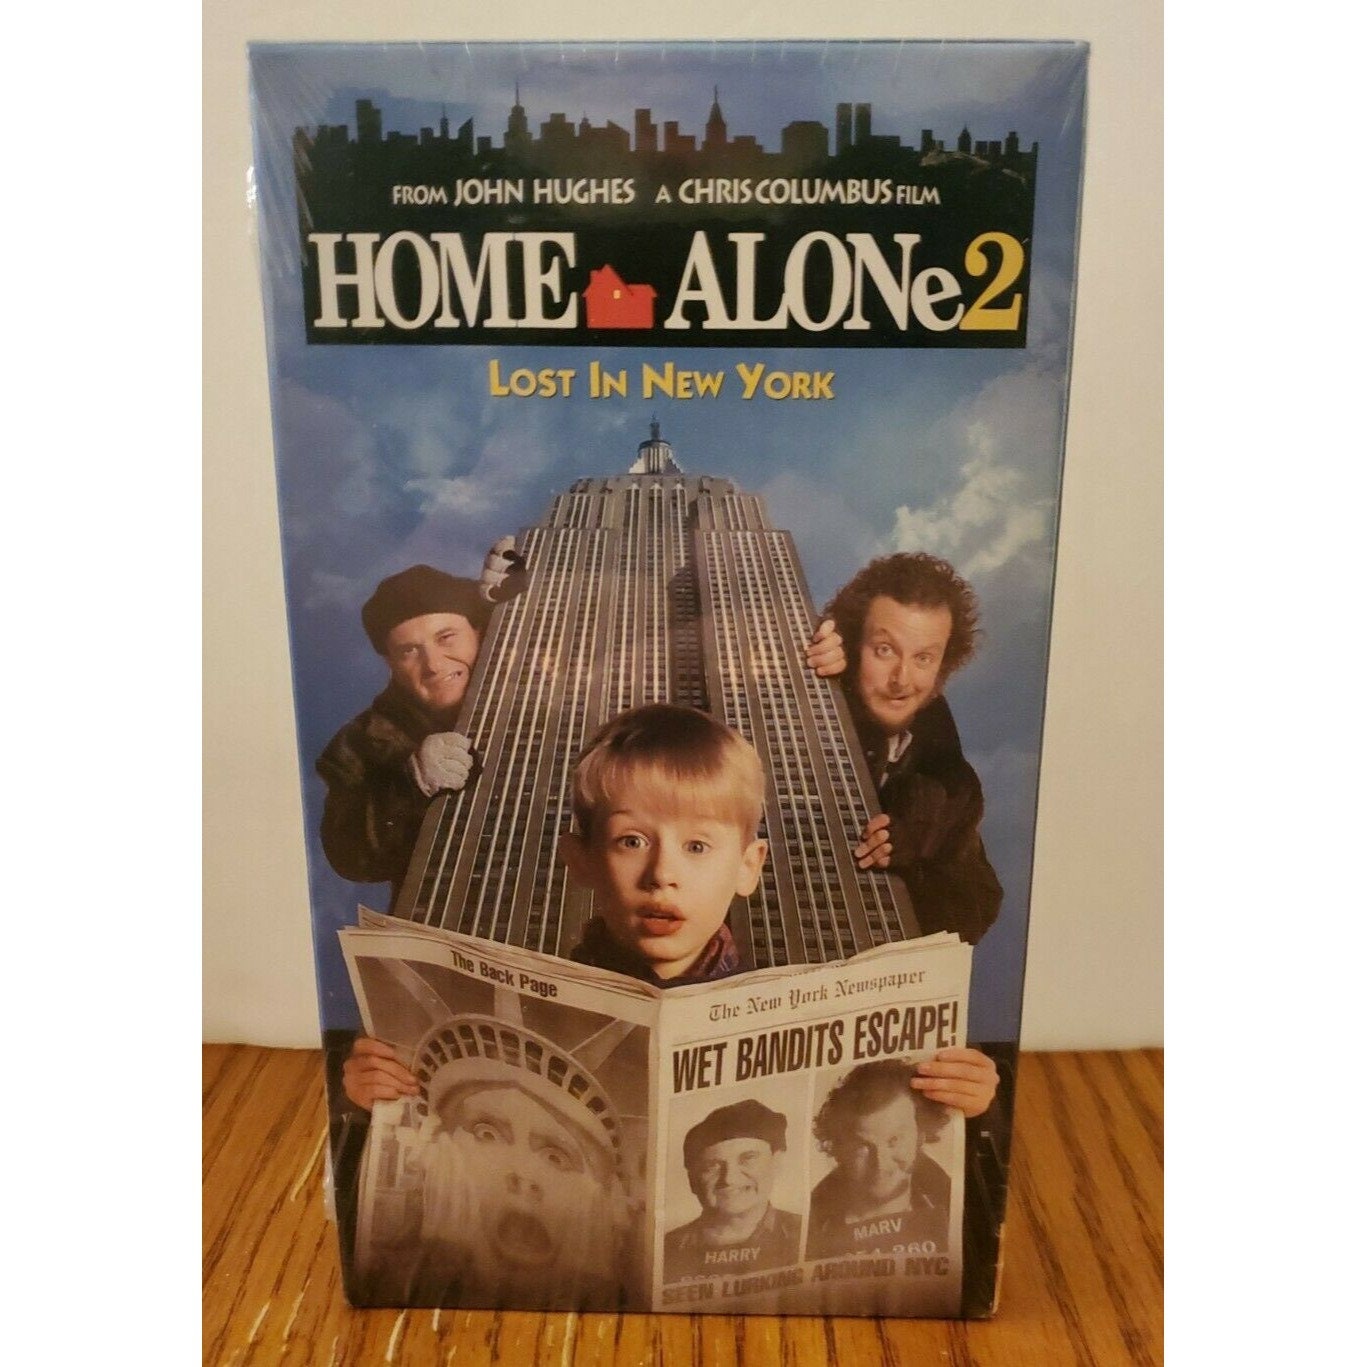 Home Alone 2: Lost in New York Sealed (VHS, 1993)